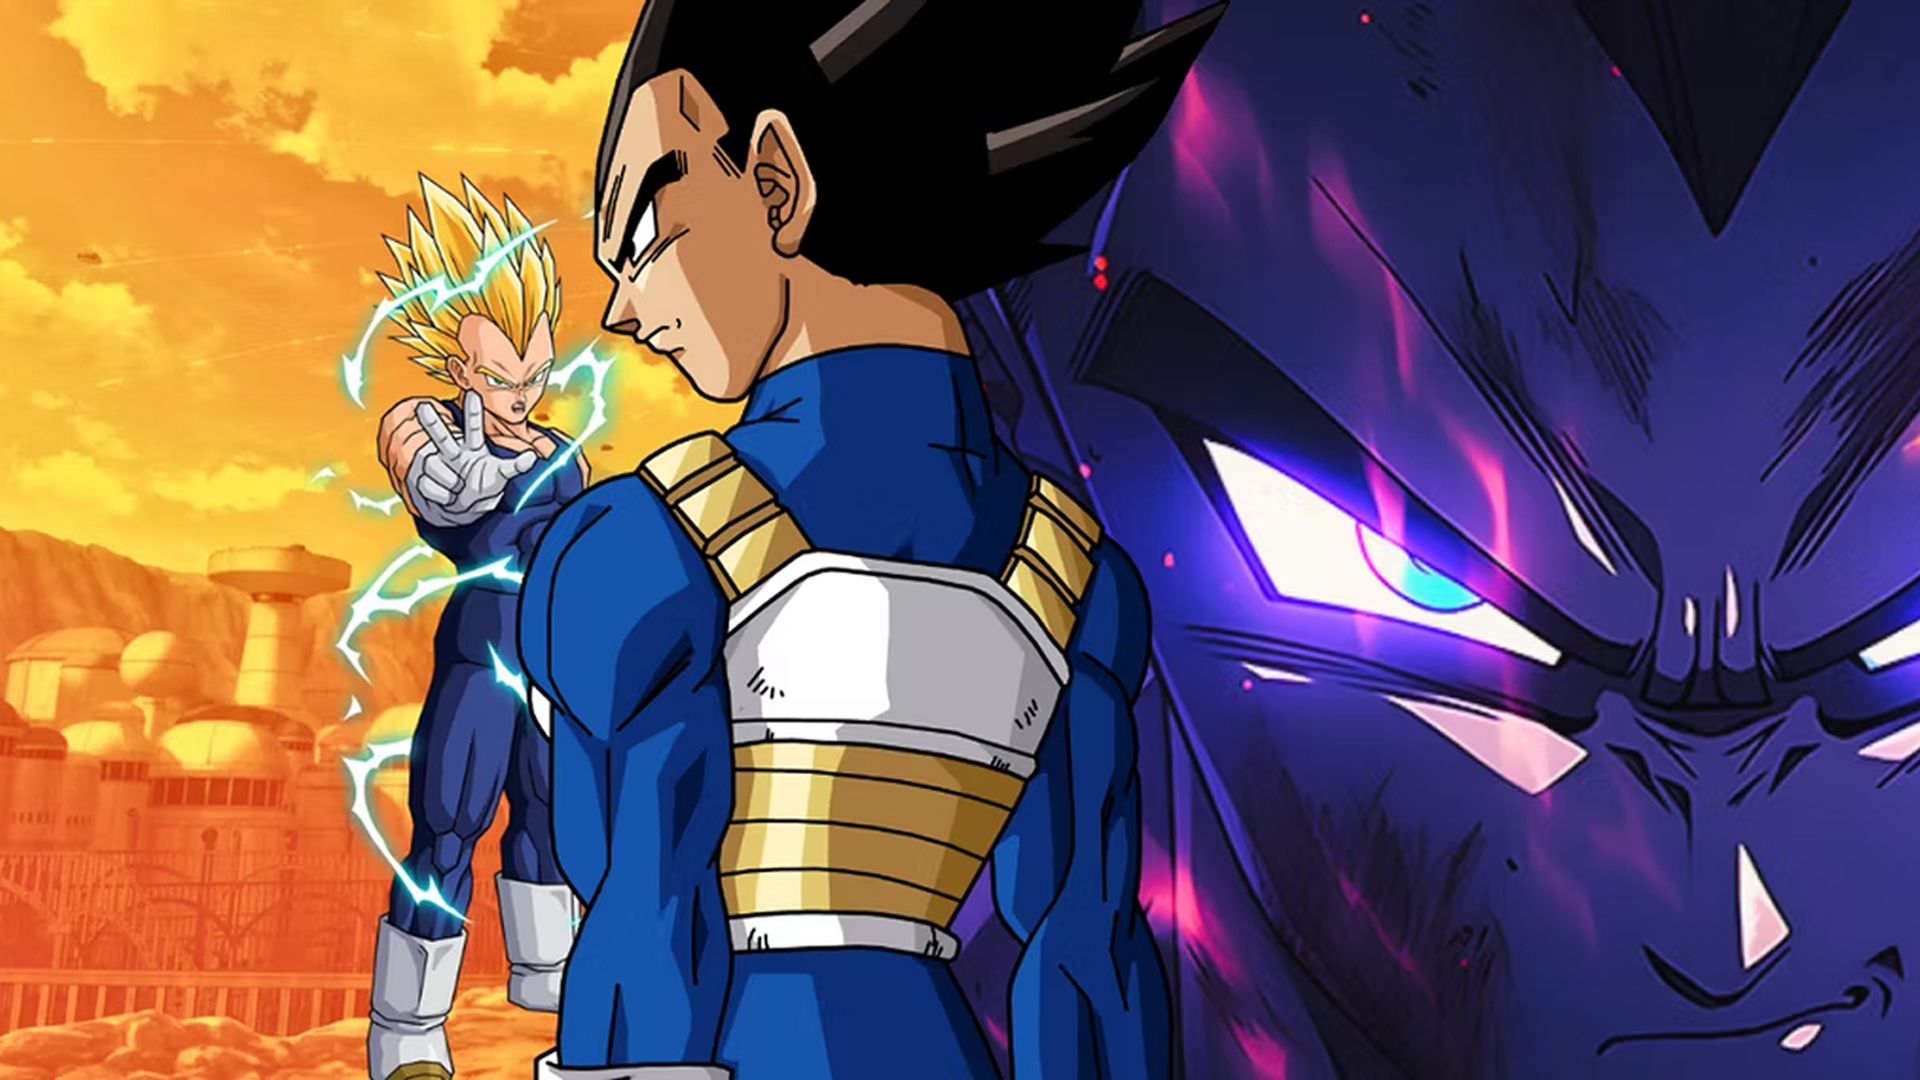 Ultra Ego Vegeta vs Ultra Instinct Goku- Who Wins This Ultimate Face-Off  That Can Destroy Planets